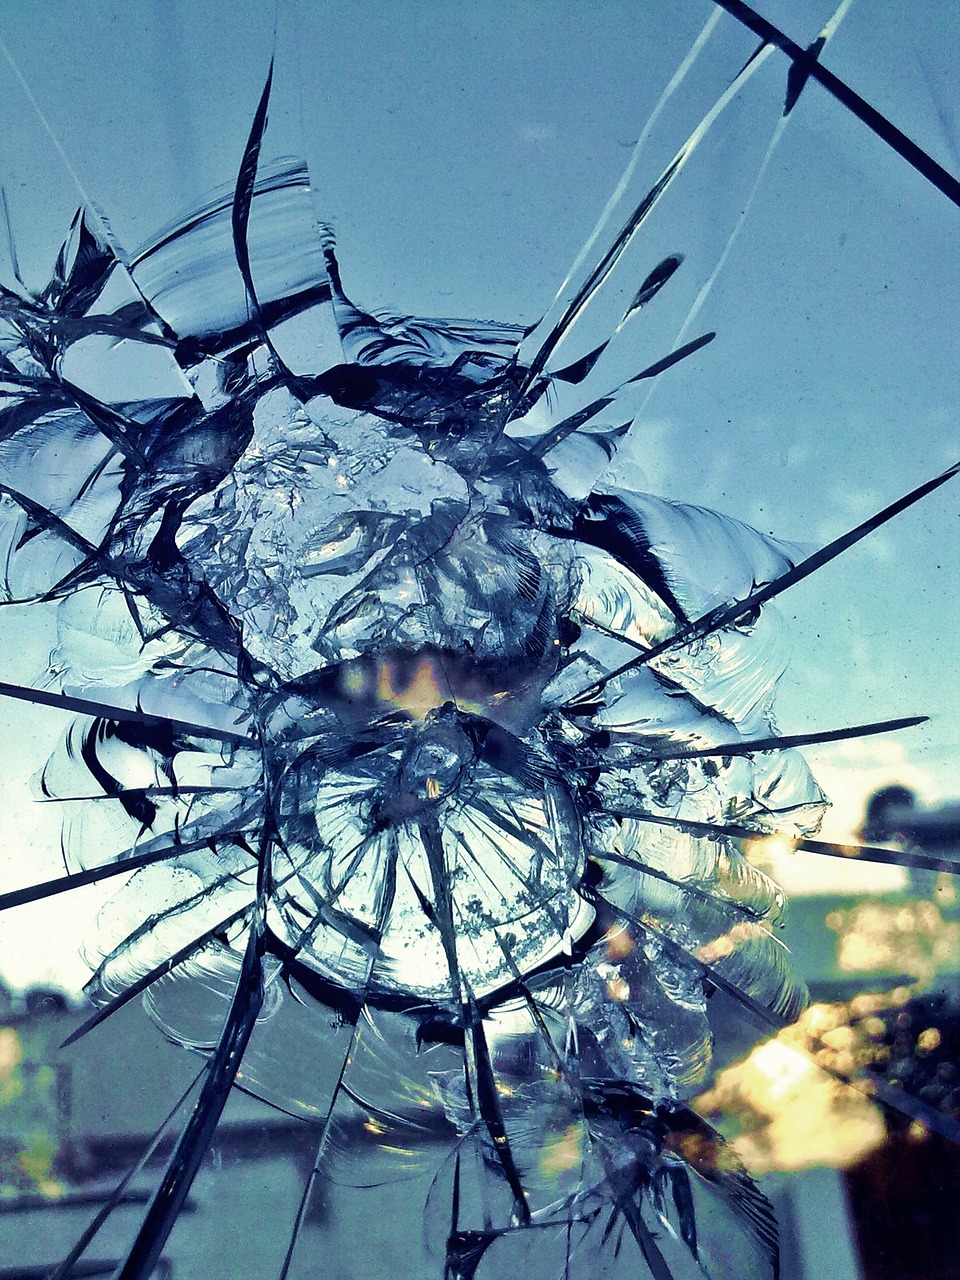 Image of a broken window - or glass ceiling with many cracks feathering outward.